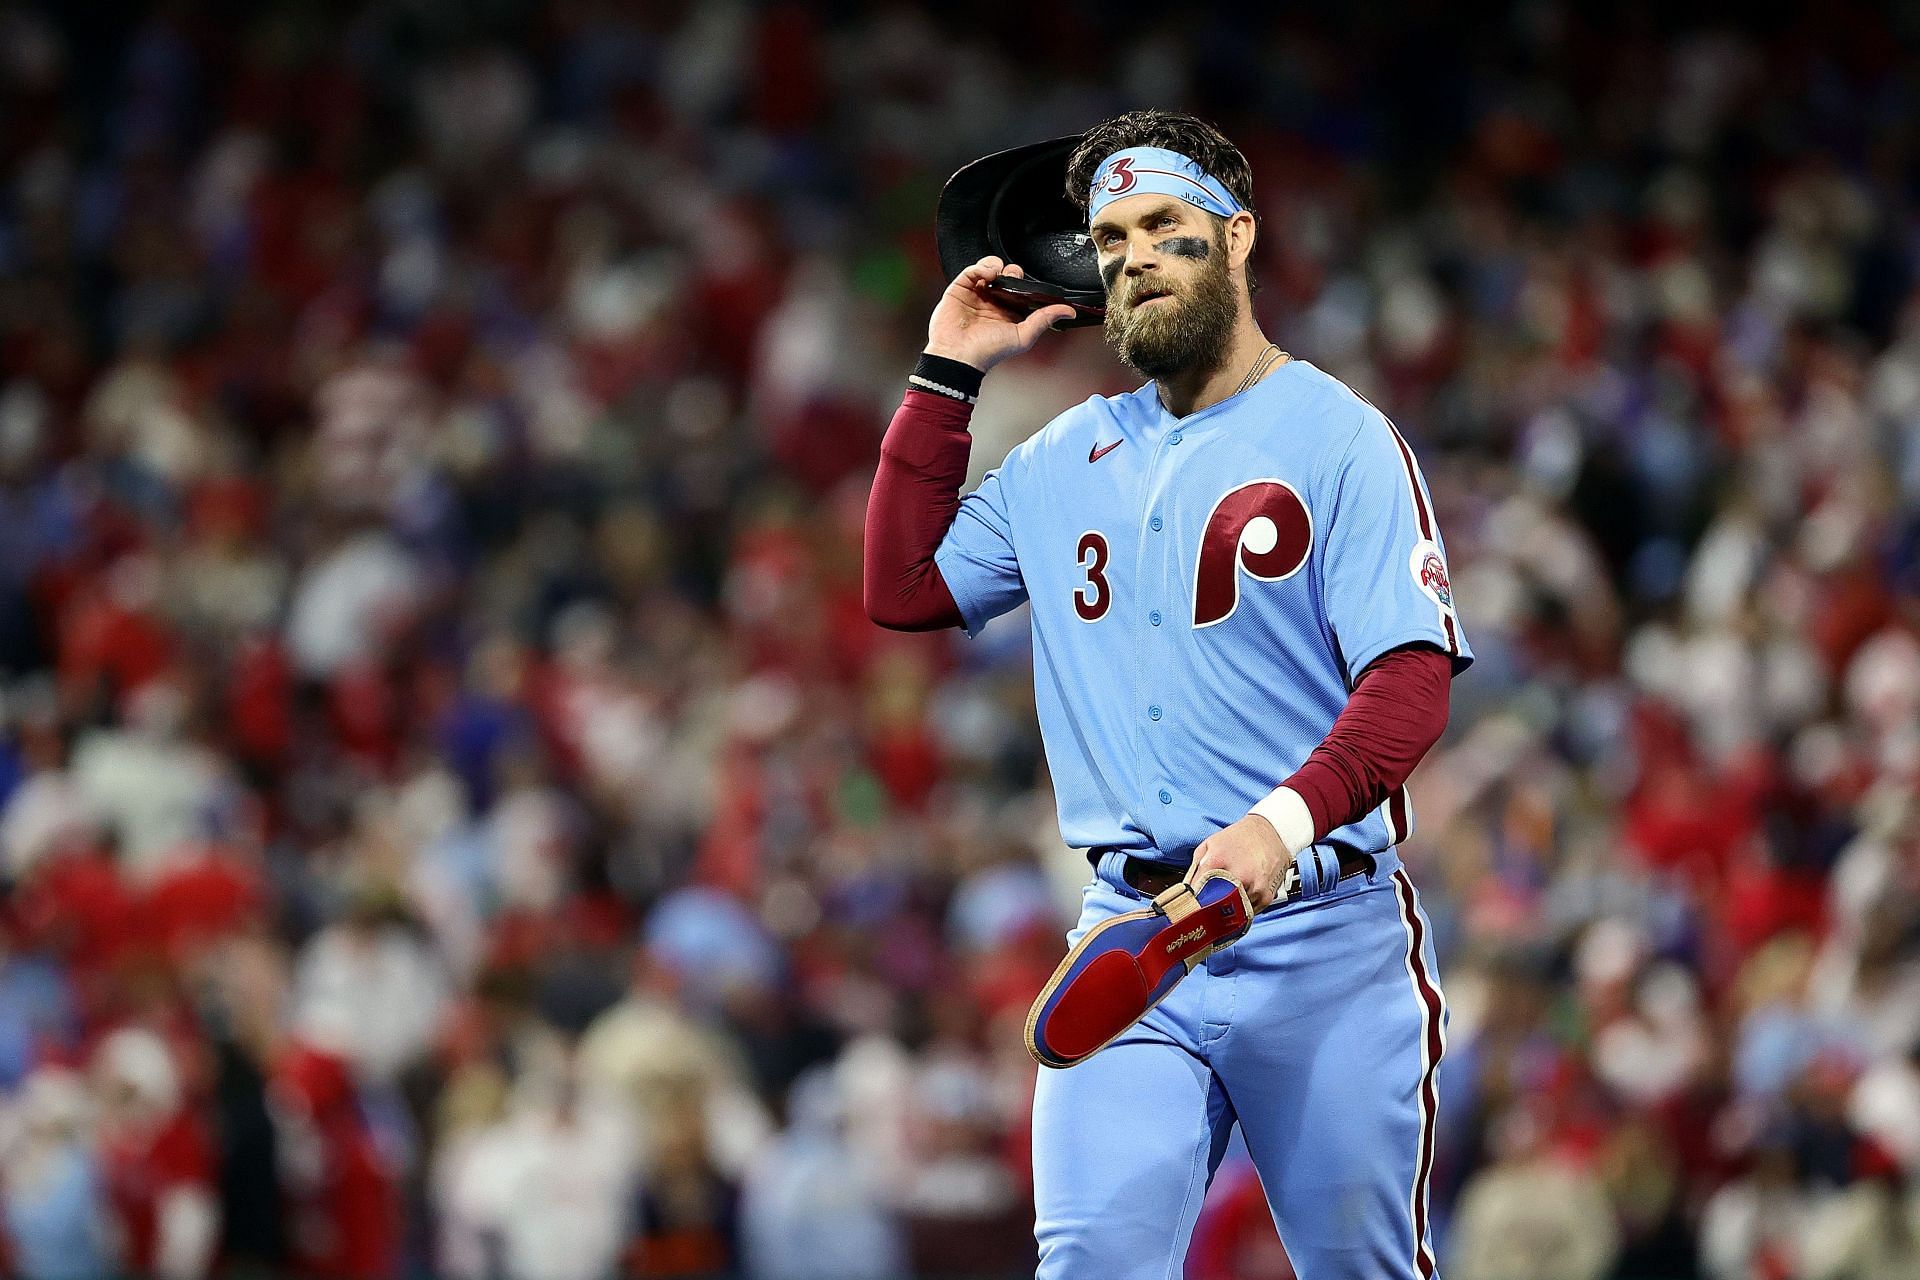 Five things learned from Phillies series loss to the Blue Jays